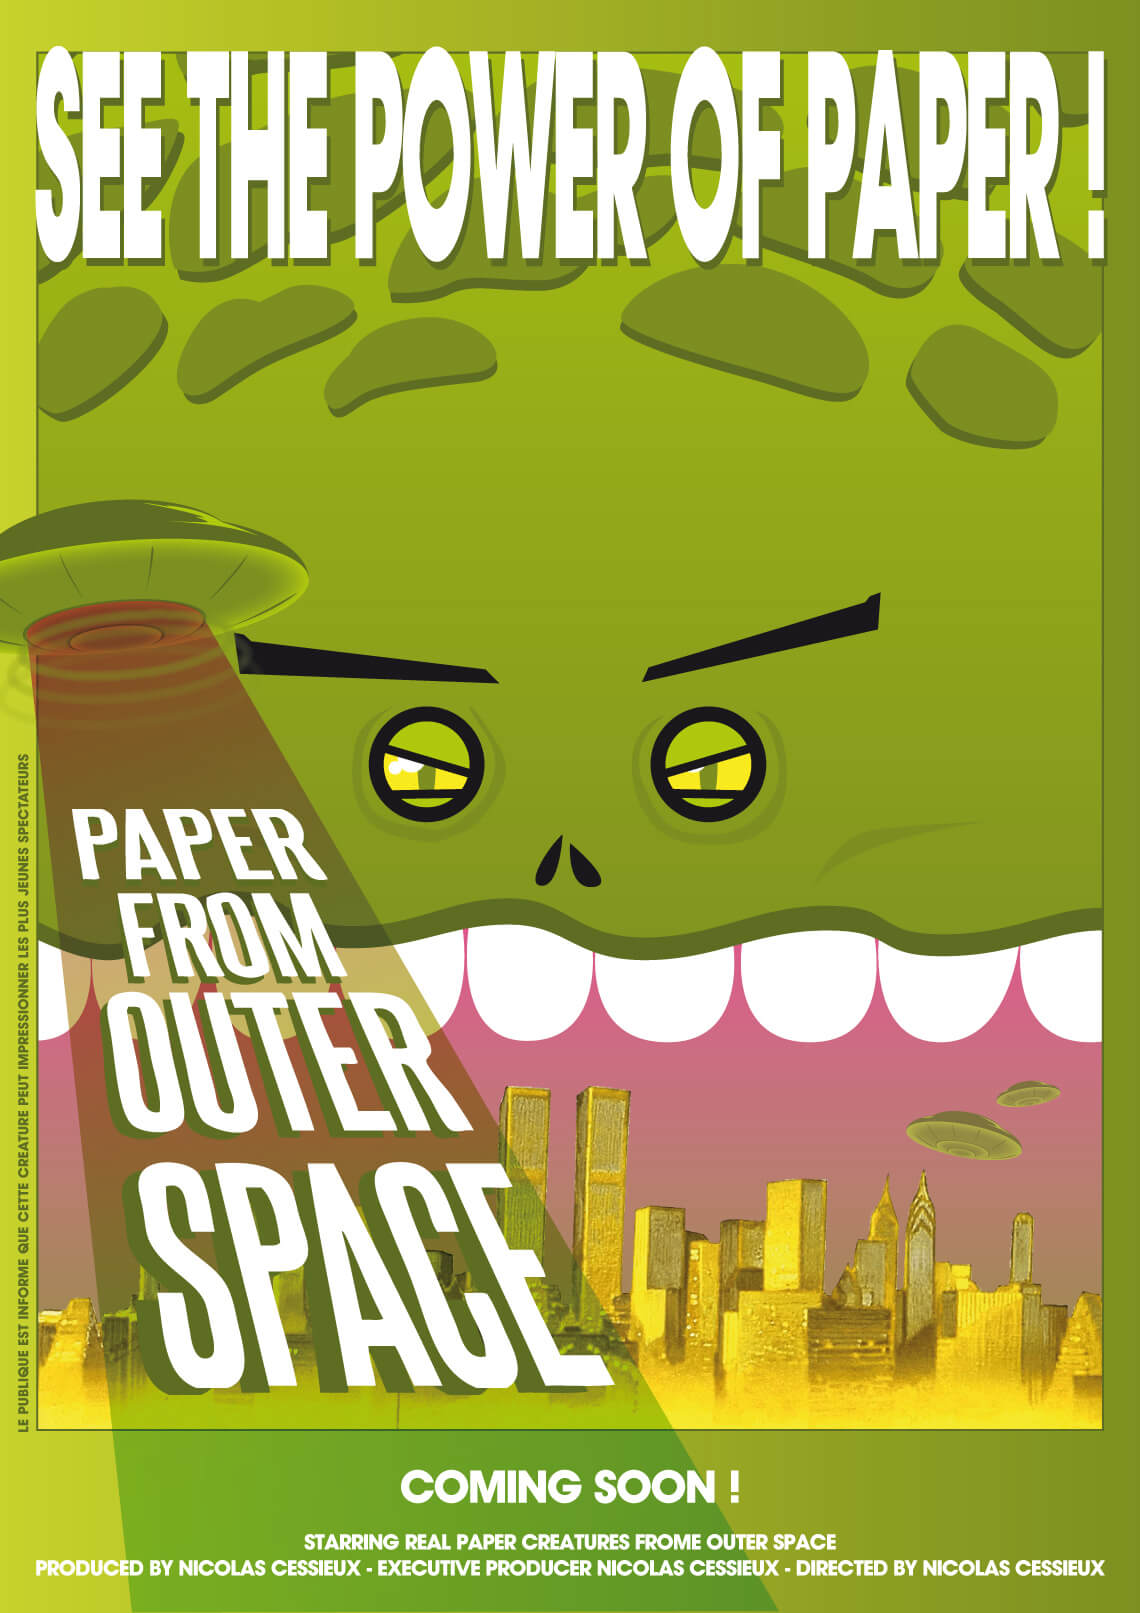 Papertoy frome outer space